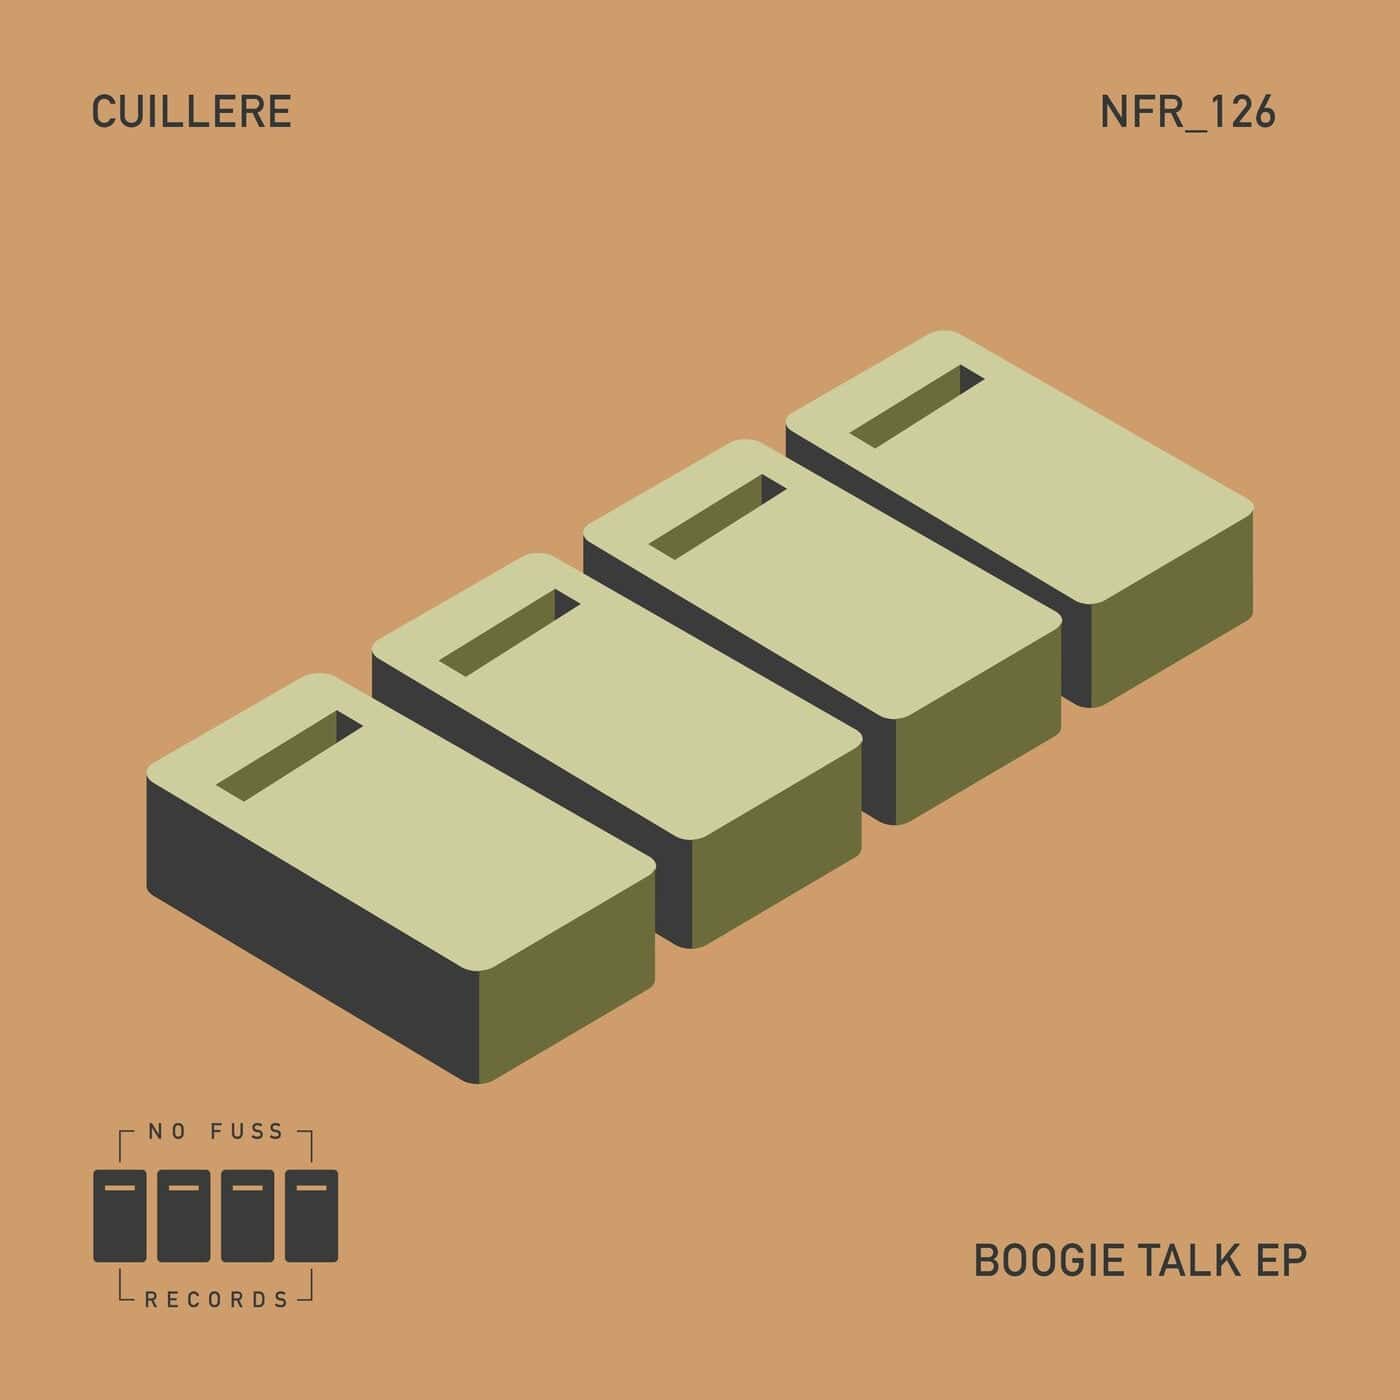 image cover: Cuillère - Boogie Talk EP / NFR126